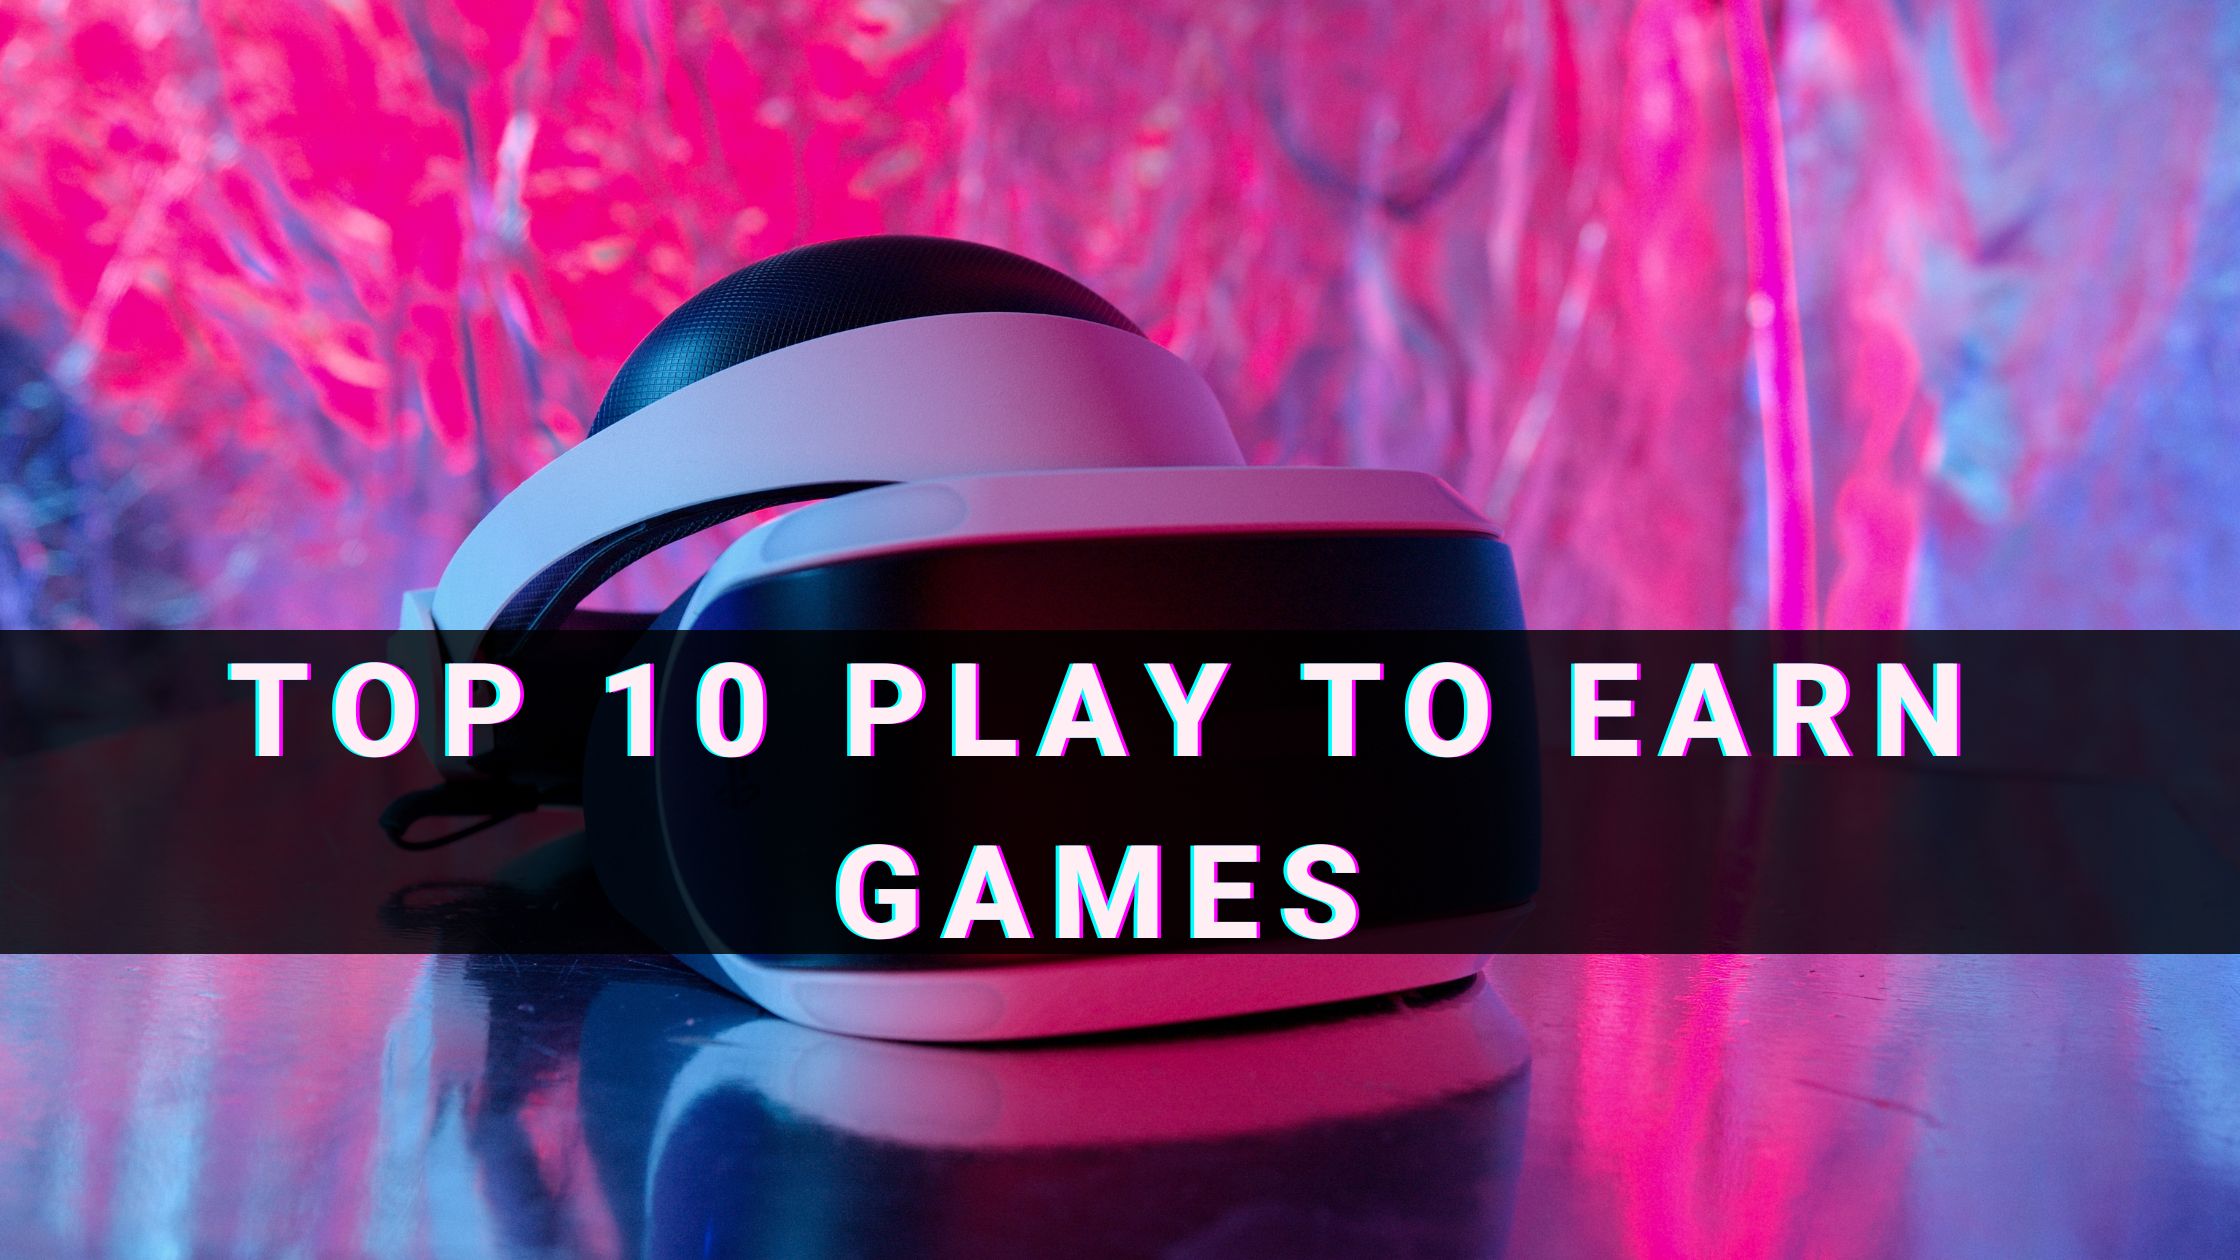 Top 10 Play To Earn Games